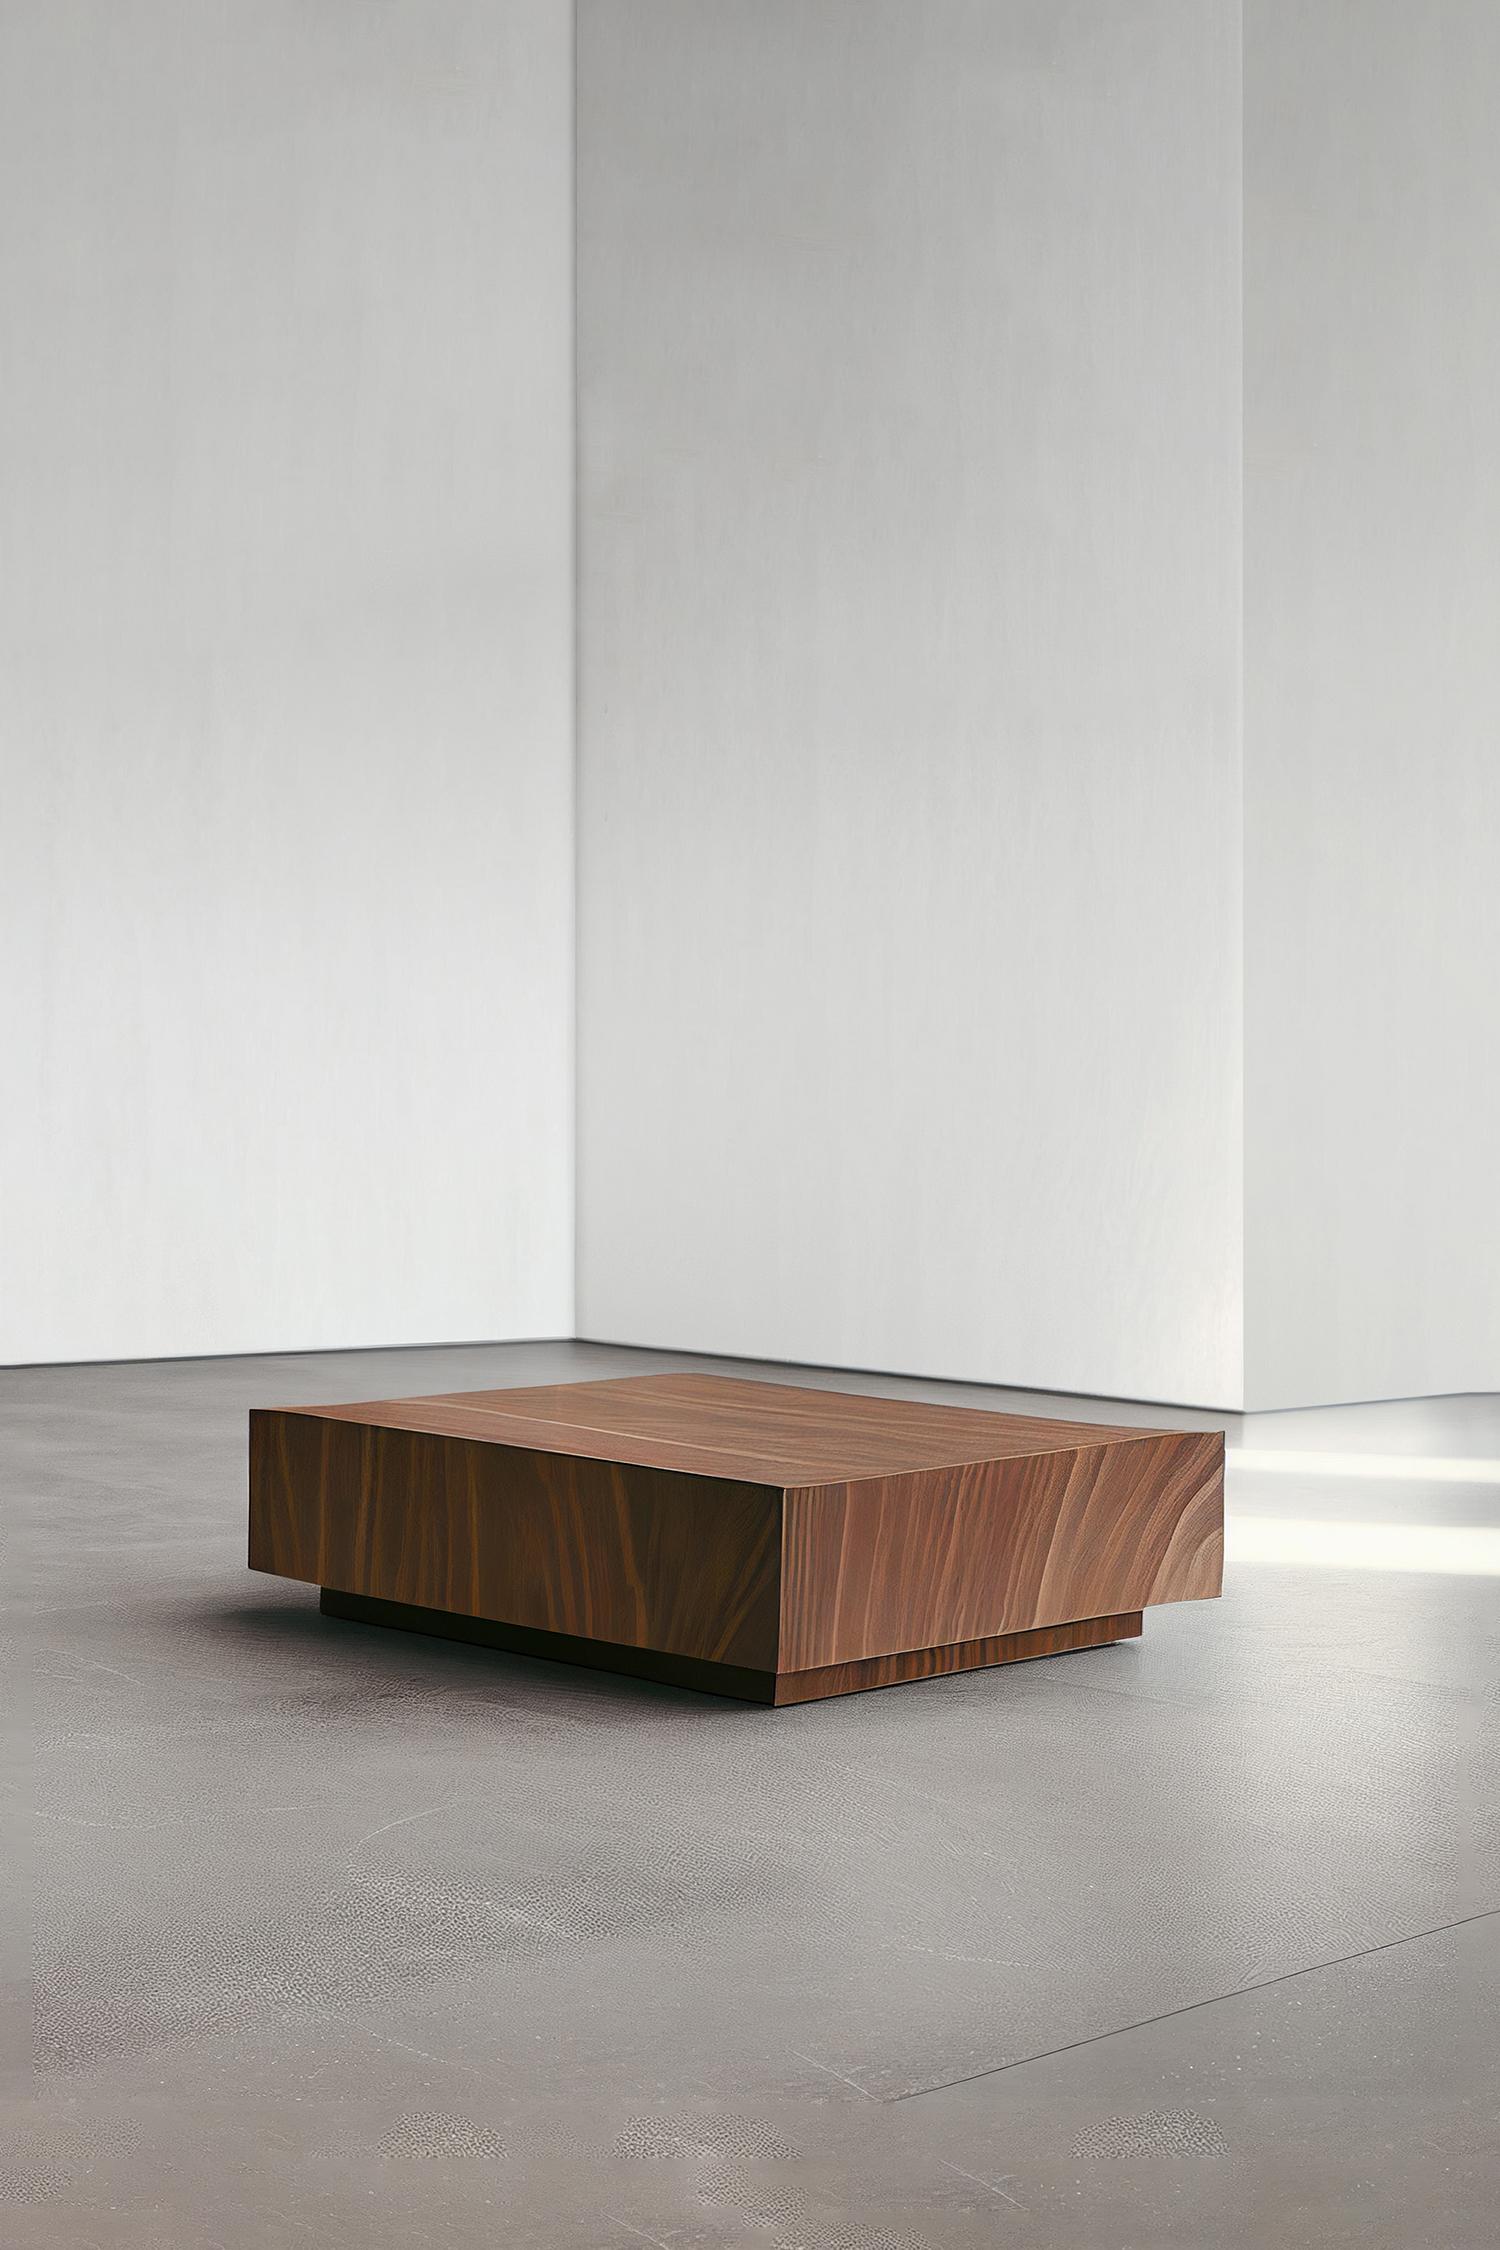 Geometric Rectangular coffee table, walnut veneer, basa by NONO

Rectangular coffee table finished with premium wood veneer, structured with particle board. Finishes available in light oak, walnut, and tinted in gray and black.

The basa coffee